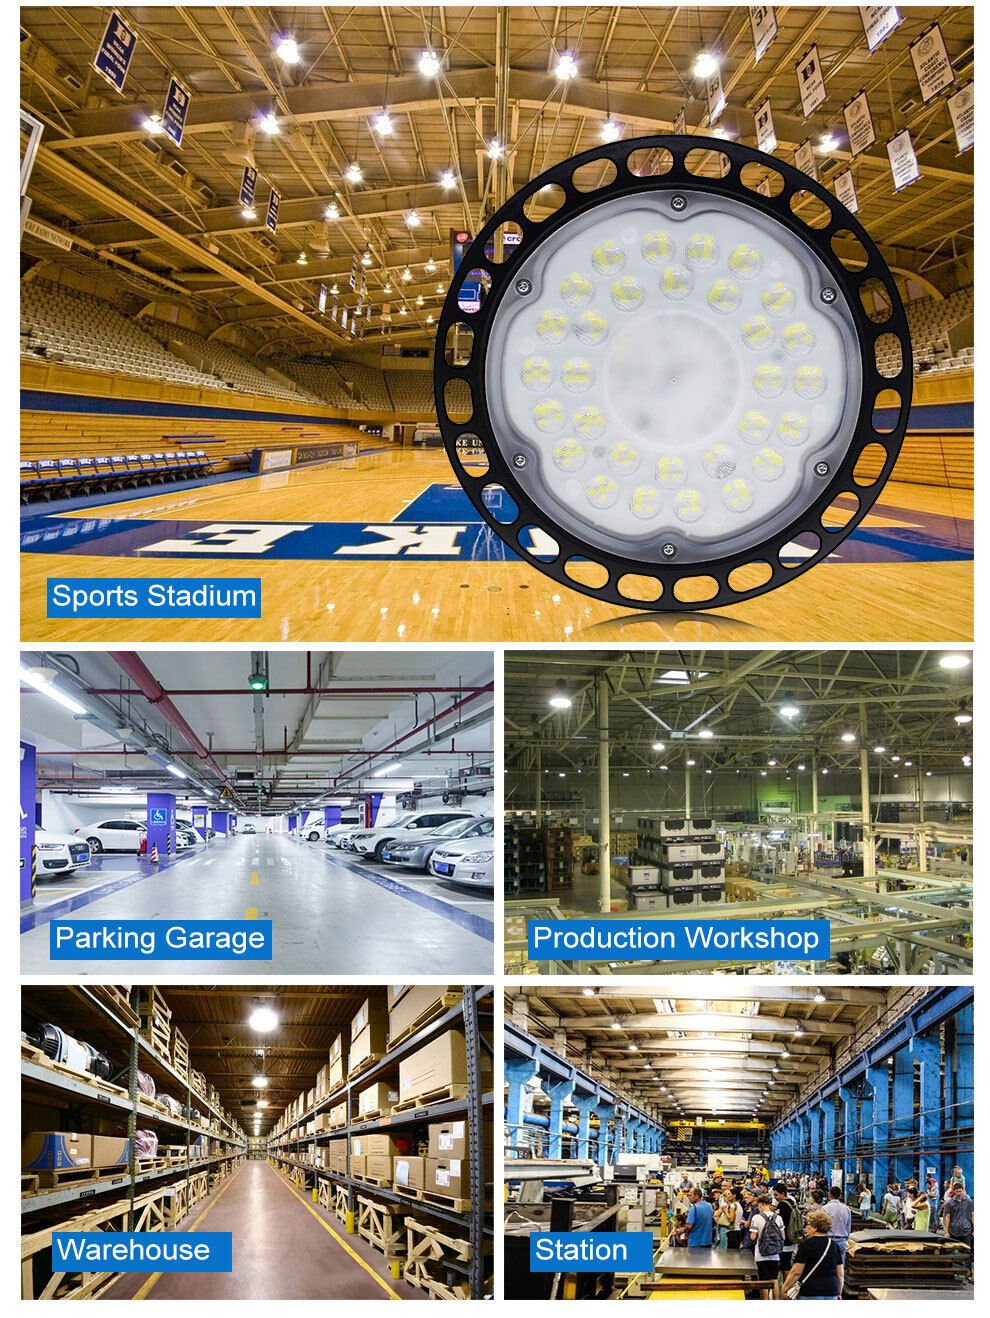 300W LED Factory Warehouse Industrial Lighting - Office Catch